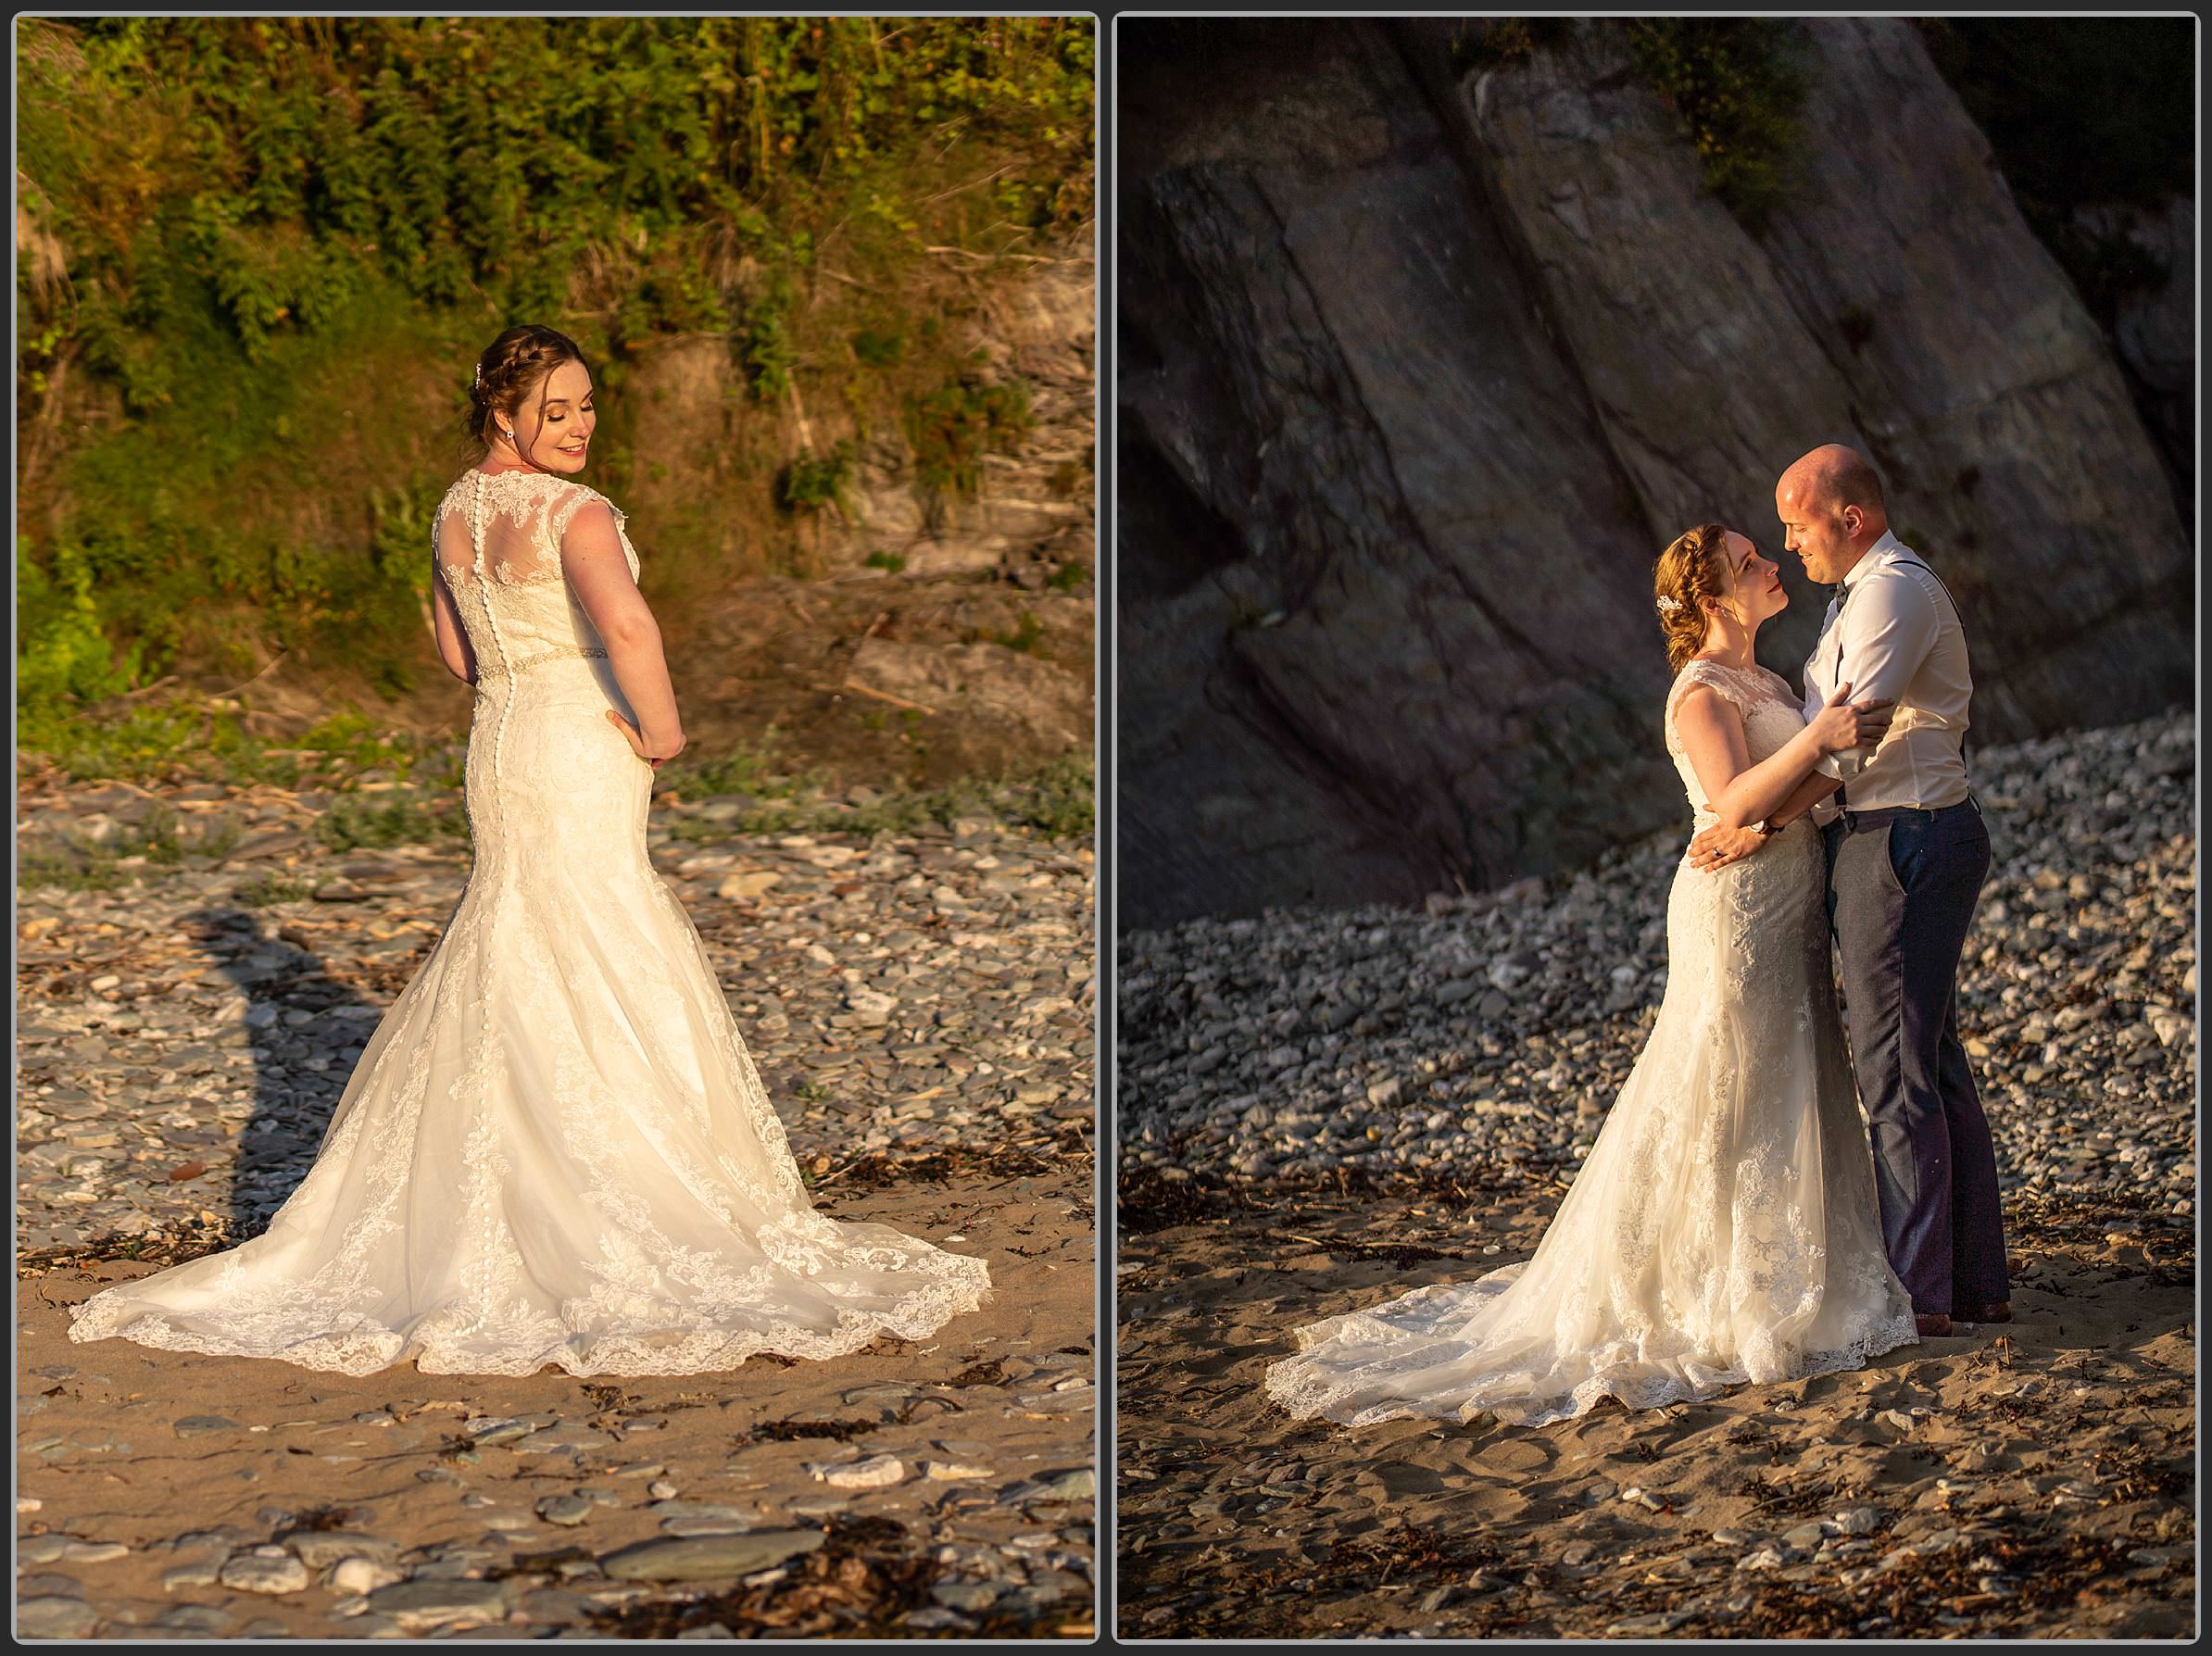 The bride and groom on the beach at Polhawn Fort wedding venue